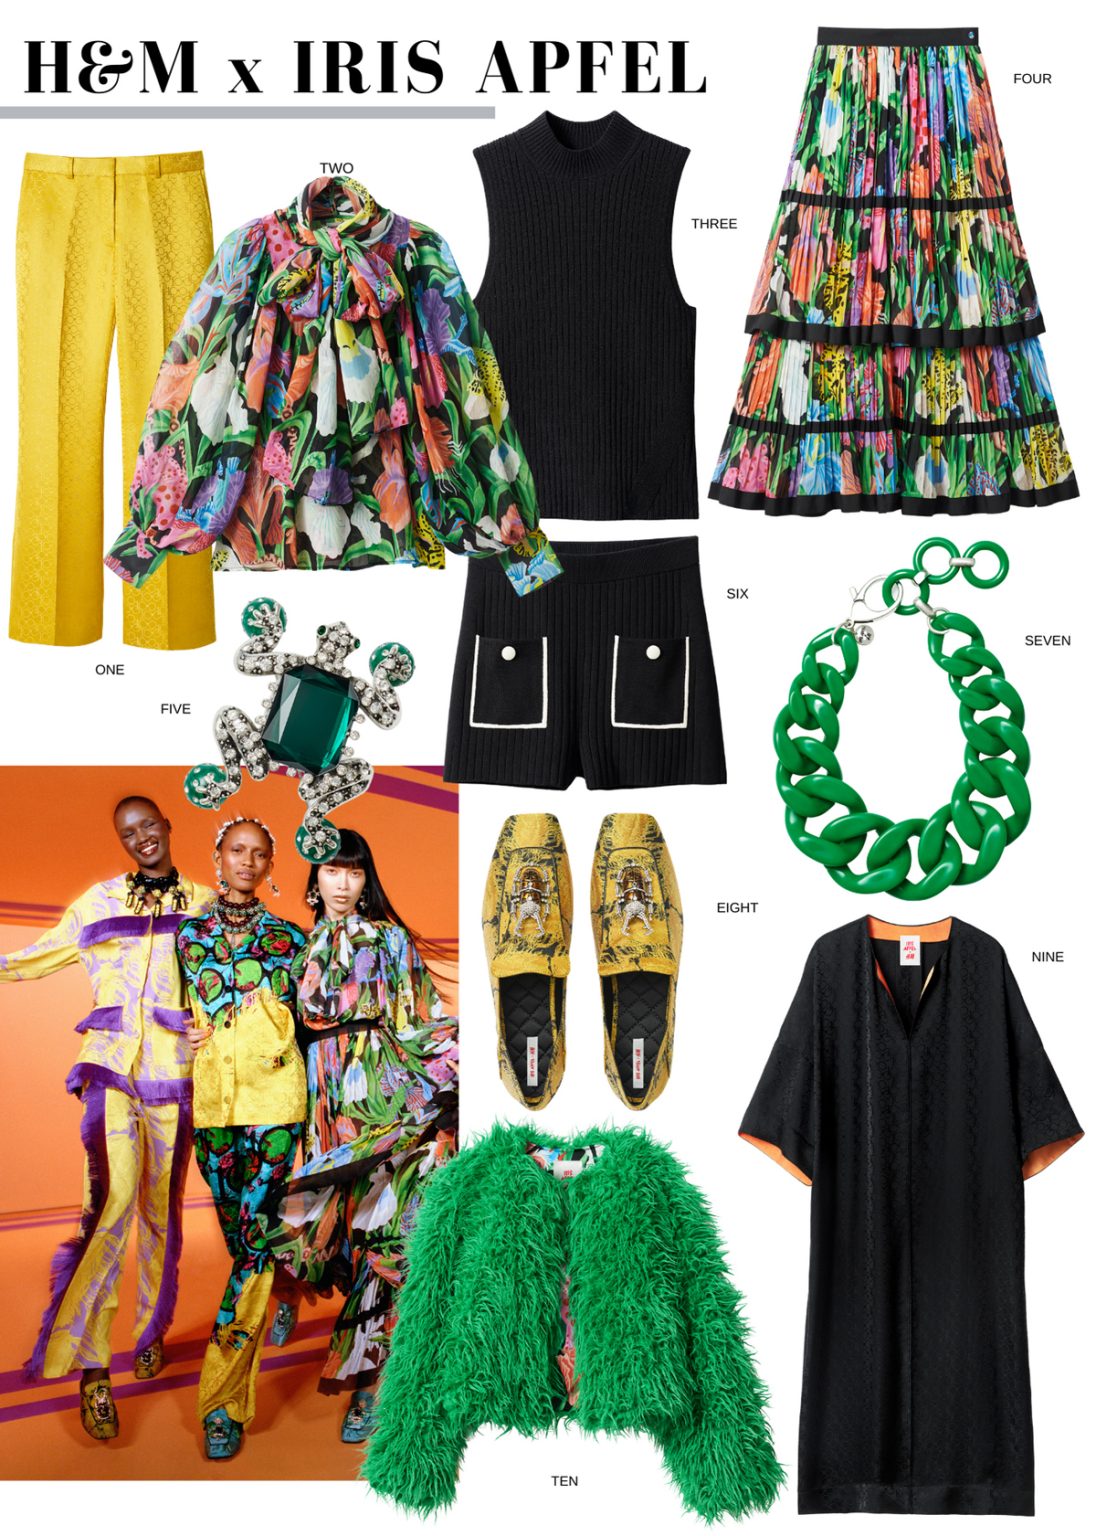 H&M Iris Apfel Collection | Iris Apfel x H&M Collection - Style Charade